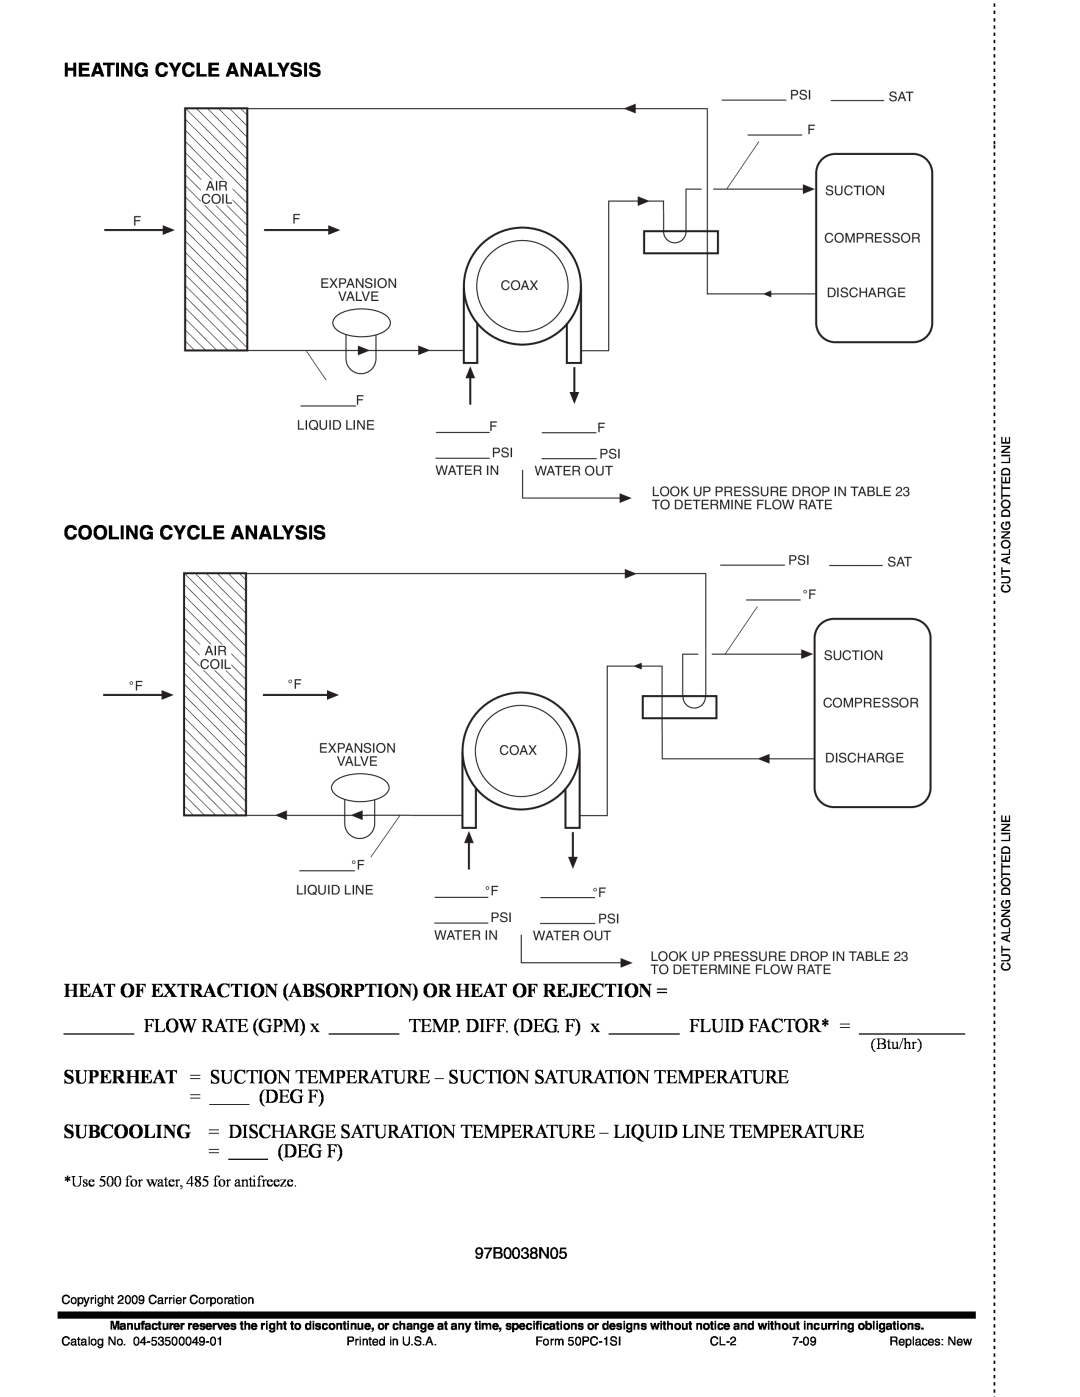 Carrier PCV015-060 Heating Cycle Analysis, Cooling Cycle Analysis, Flow Rate Gpm, Temp. Diff. Deg. F, Fluid Factor* = 